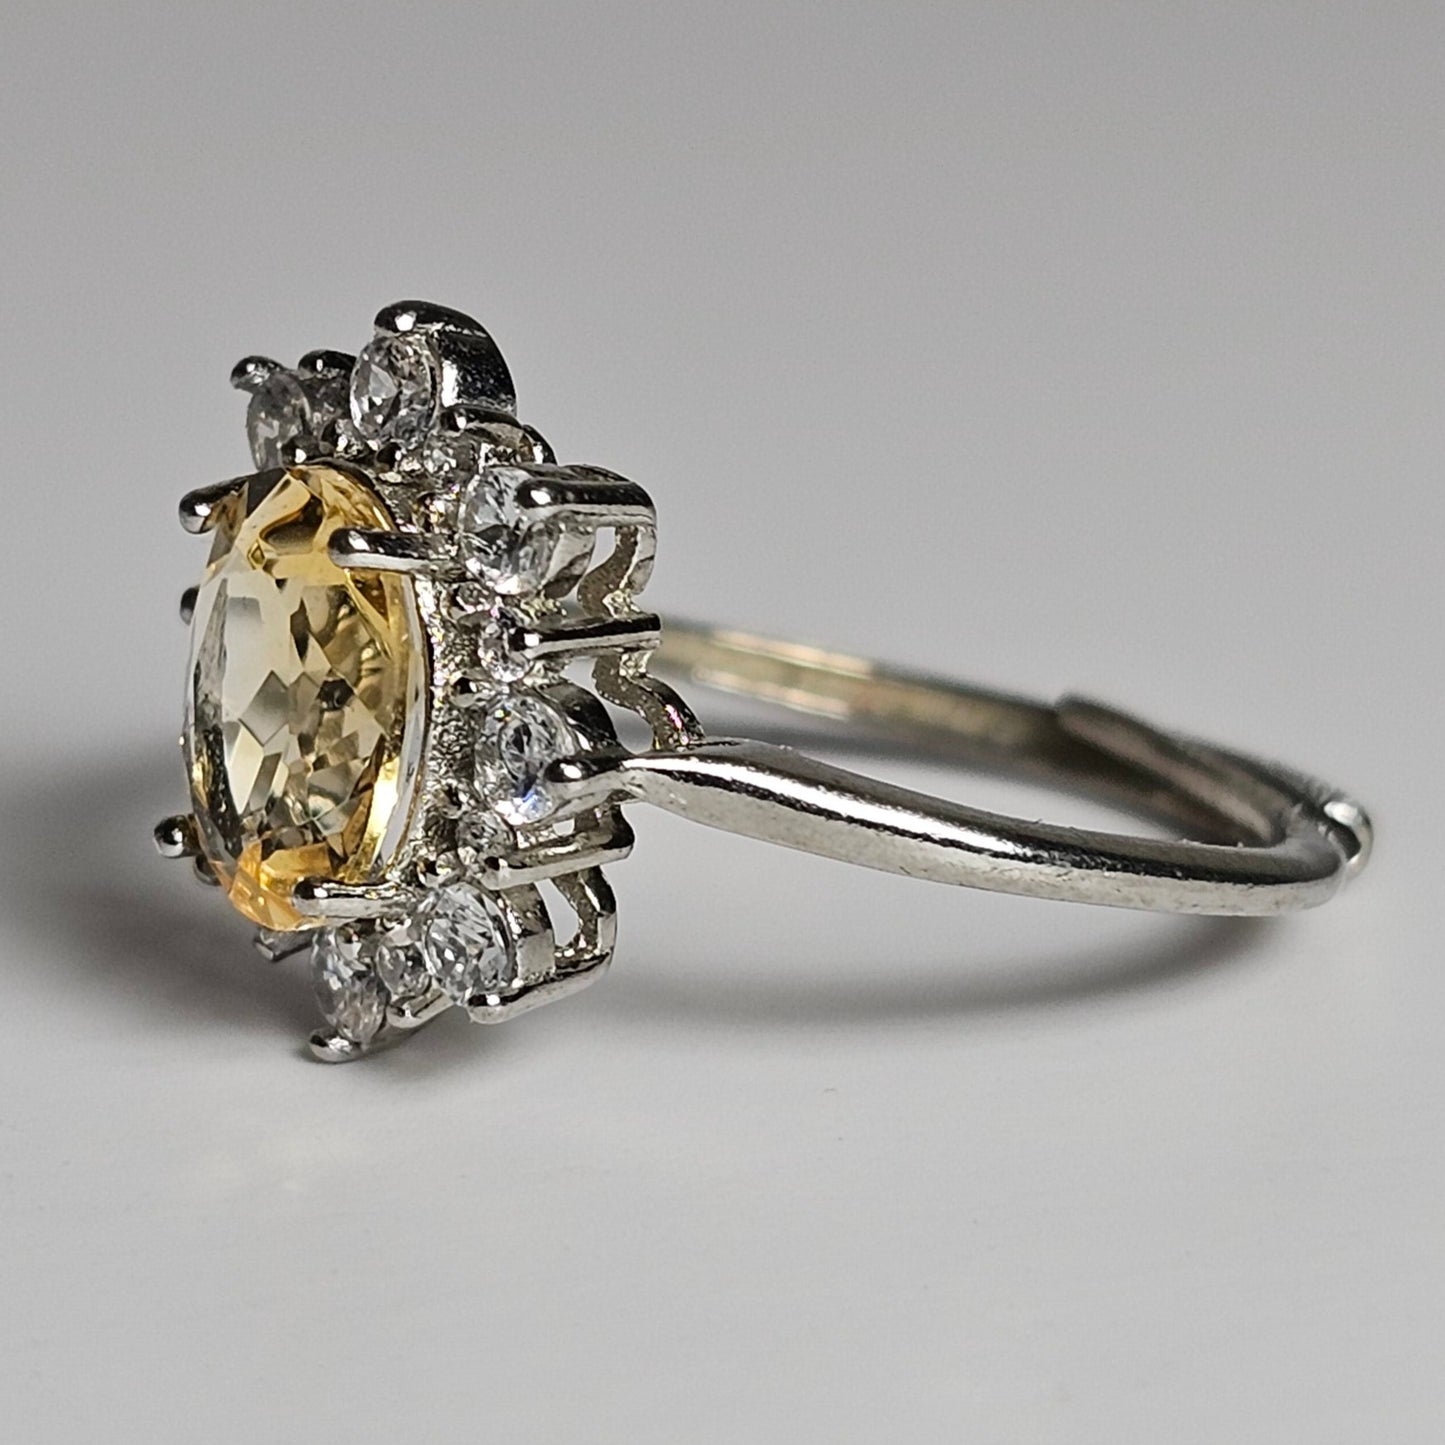 This floral burst ring is crafted from sterling silver and features a stunning oval shaped Citrine centre stone surrounded with zircon.